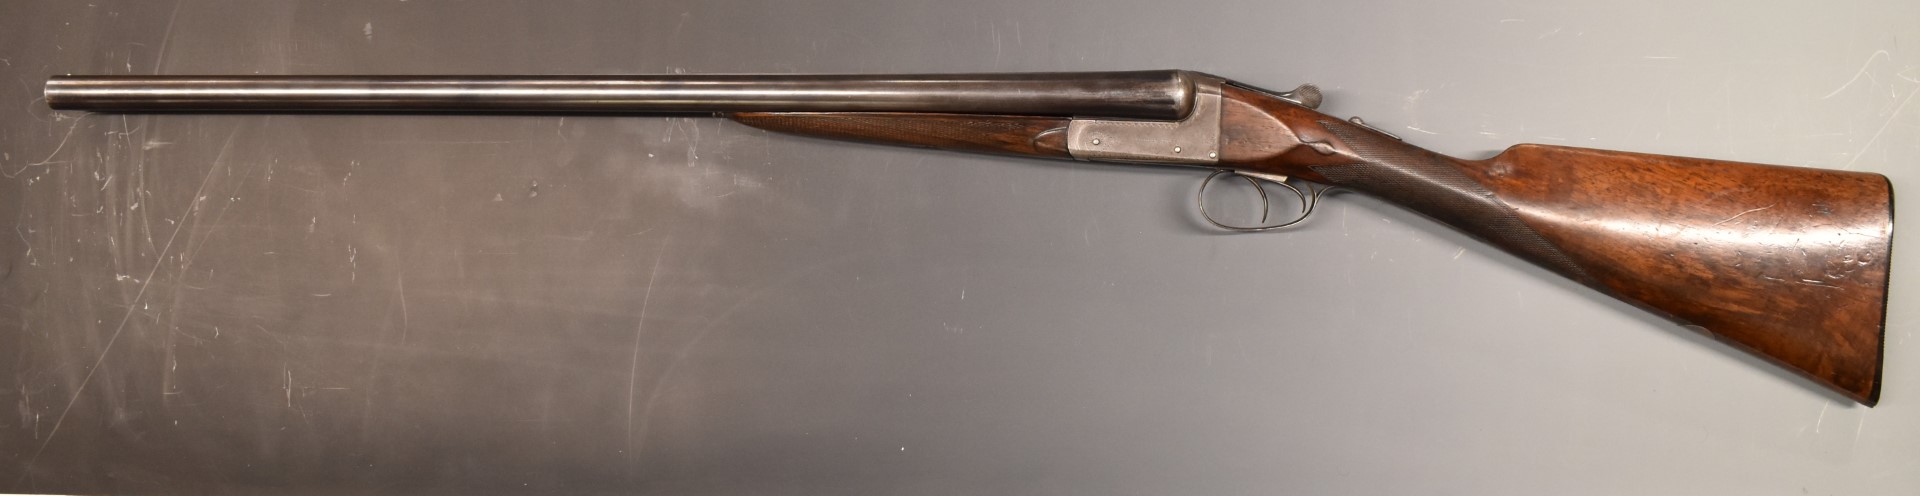 Charles Rosson & Son 12 bore side by side ejector shotgun with named lock, border engraved lock, - Image 6 of 11